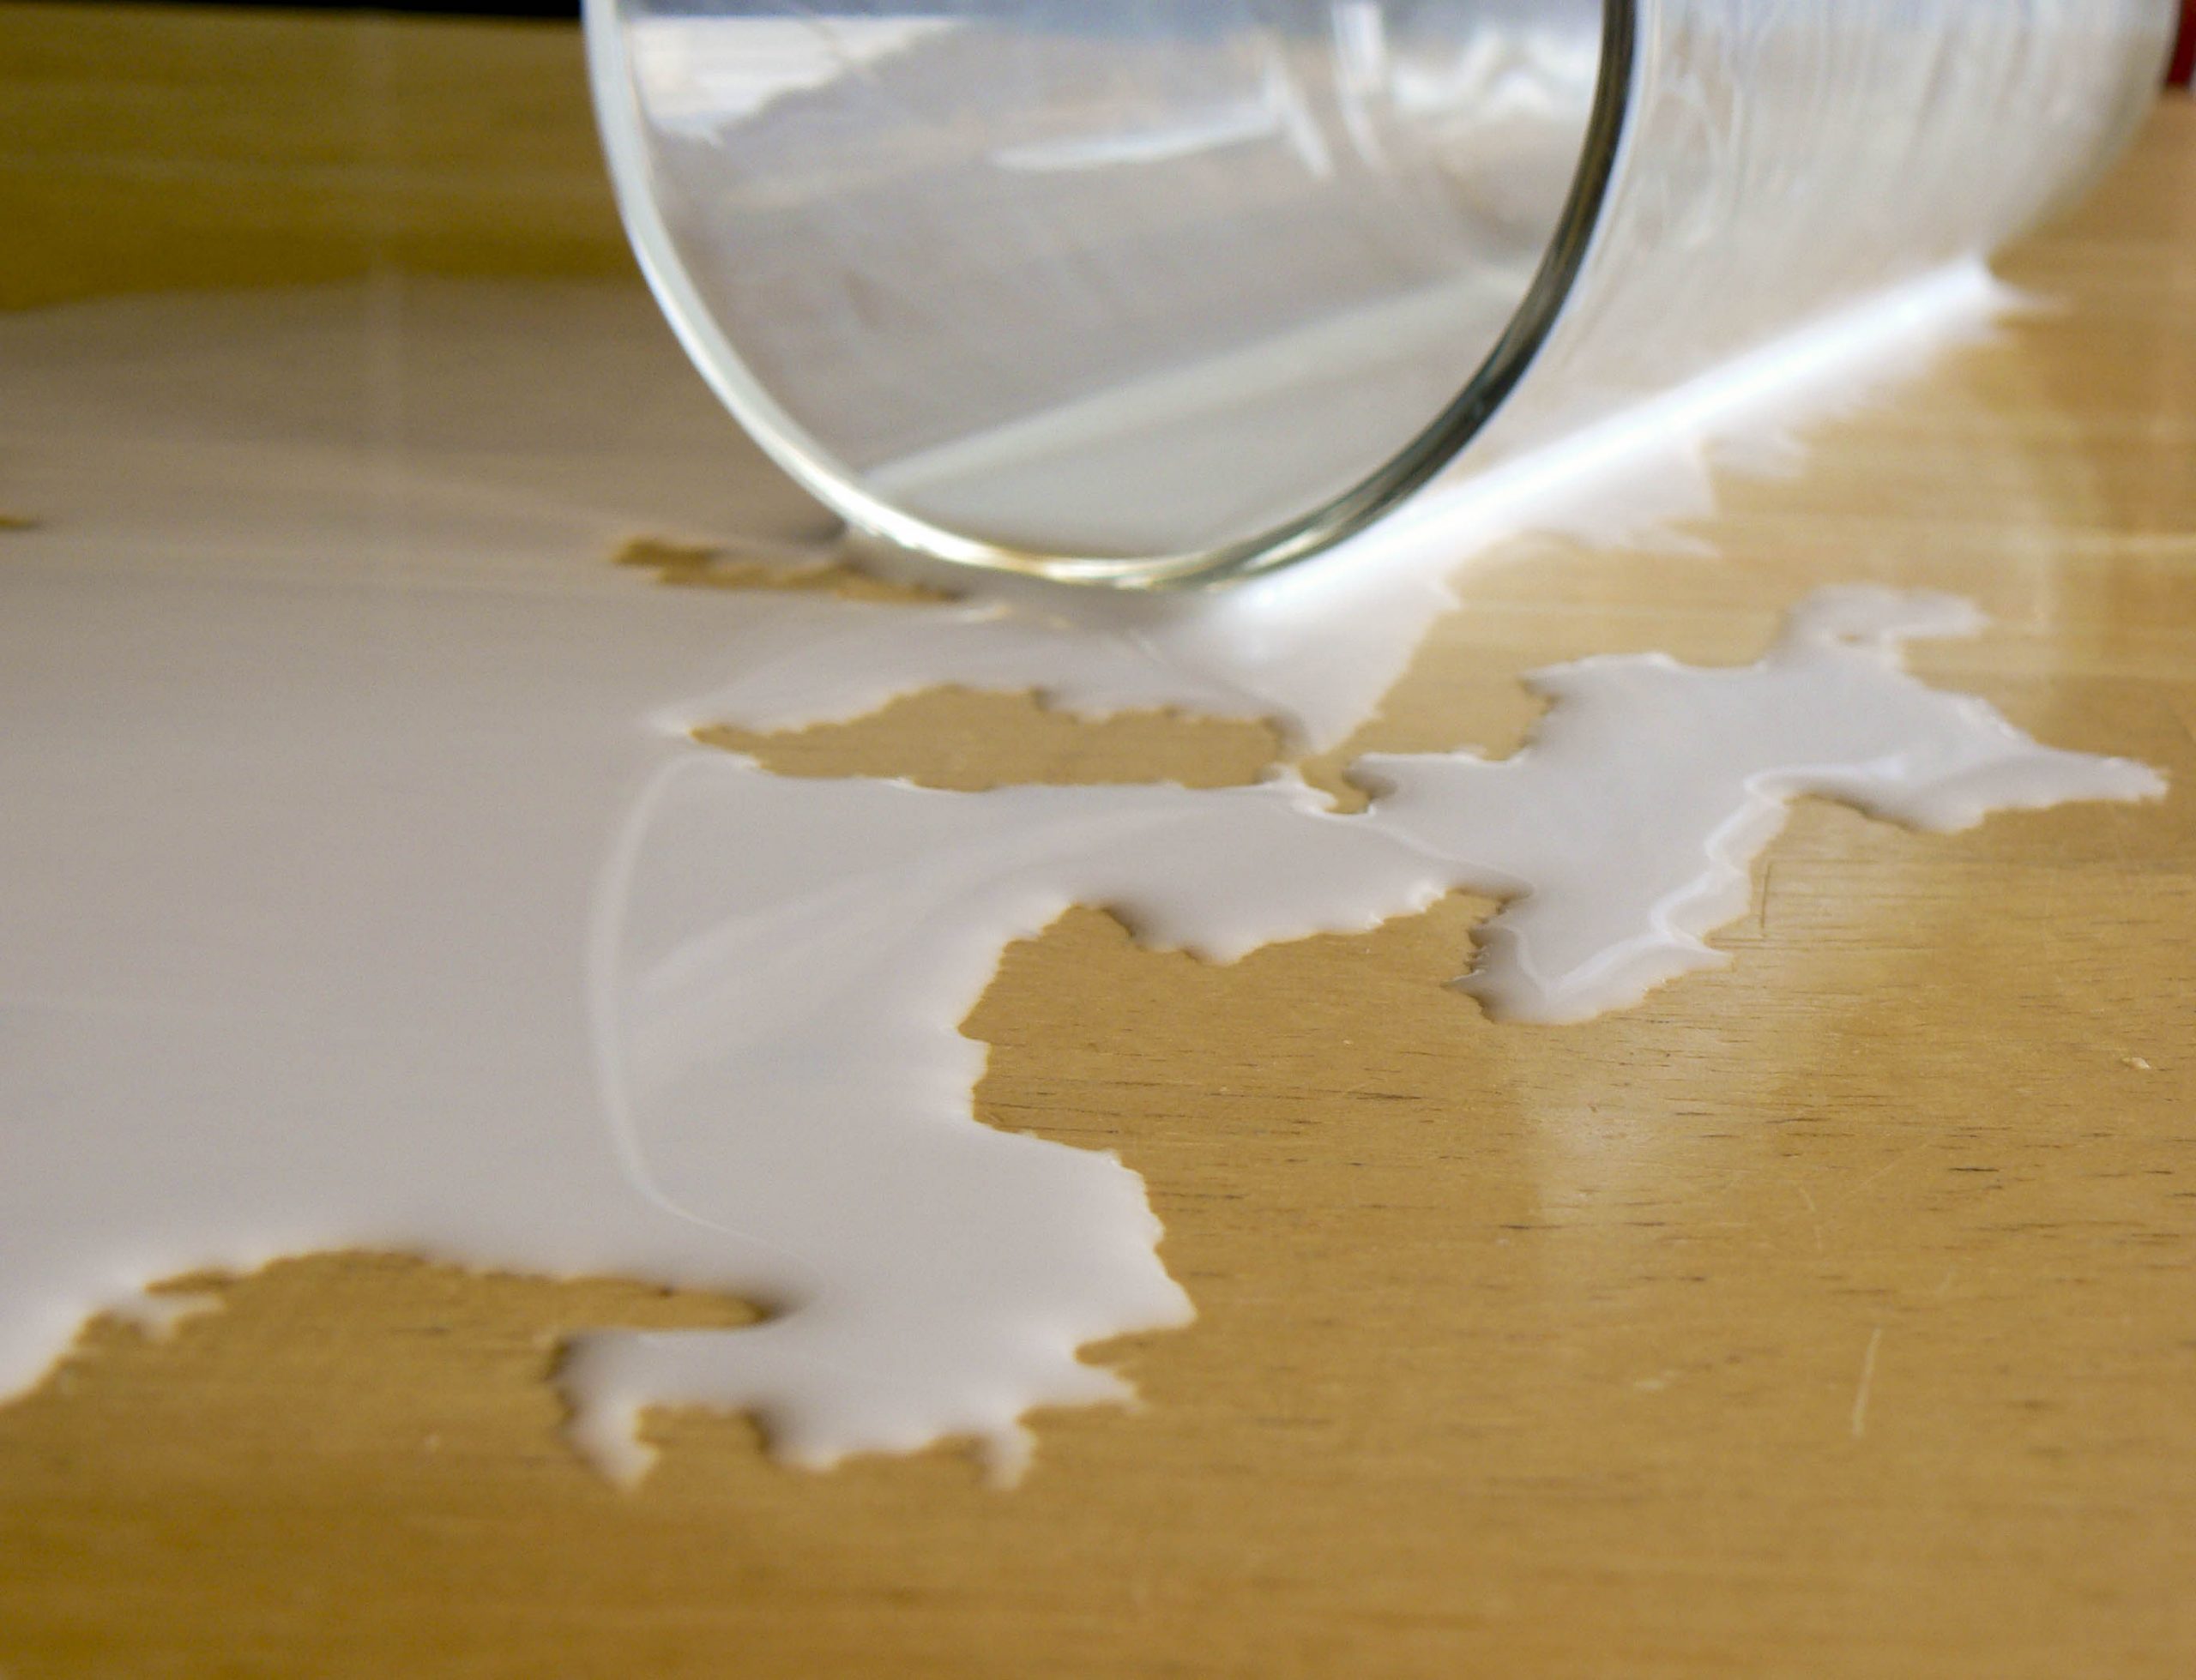 Photo of milk spilt out of glass onto a table